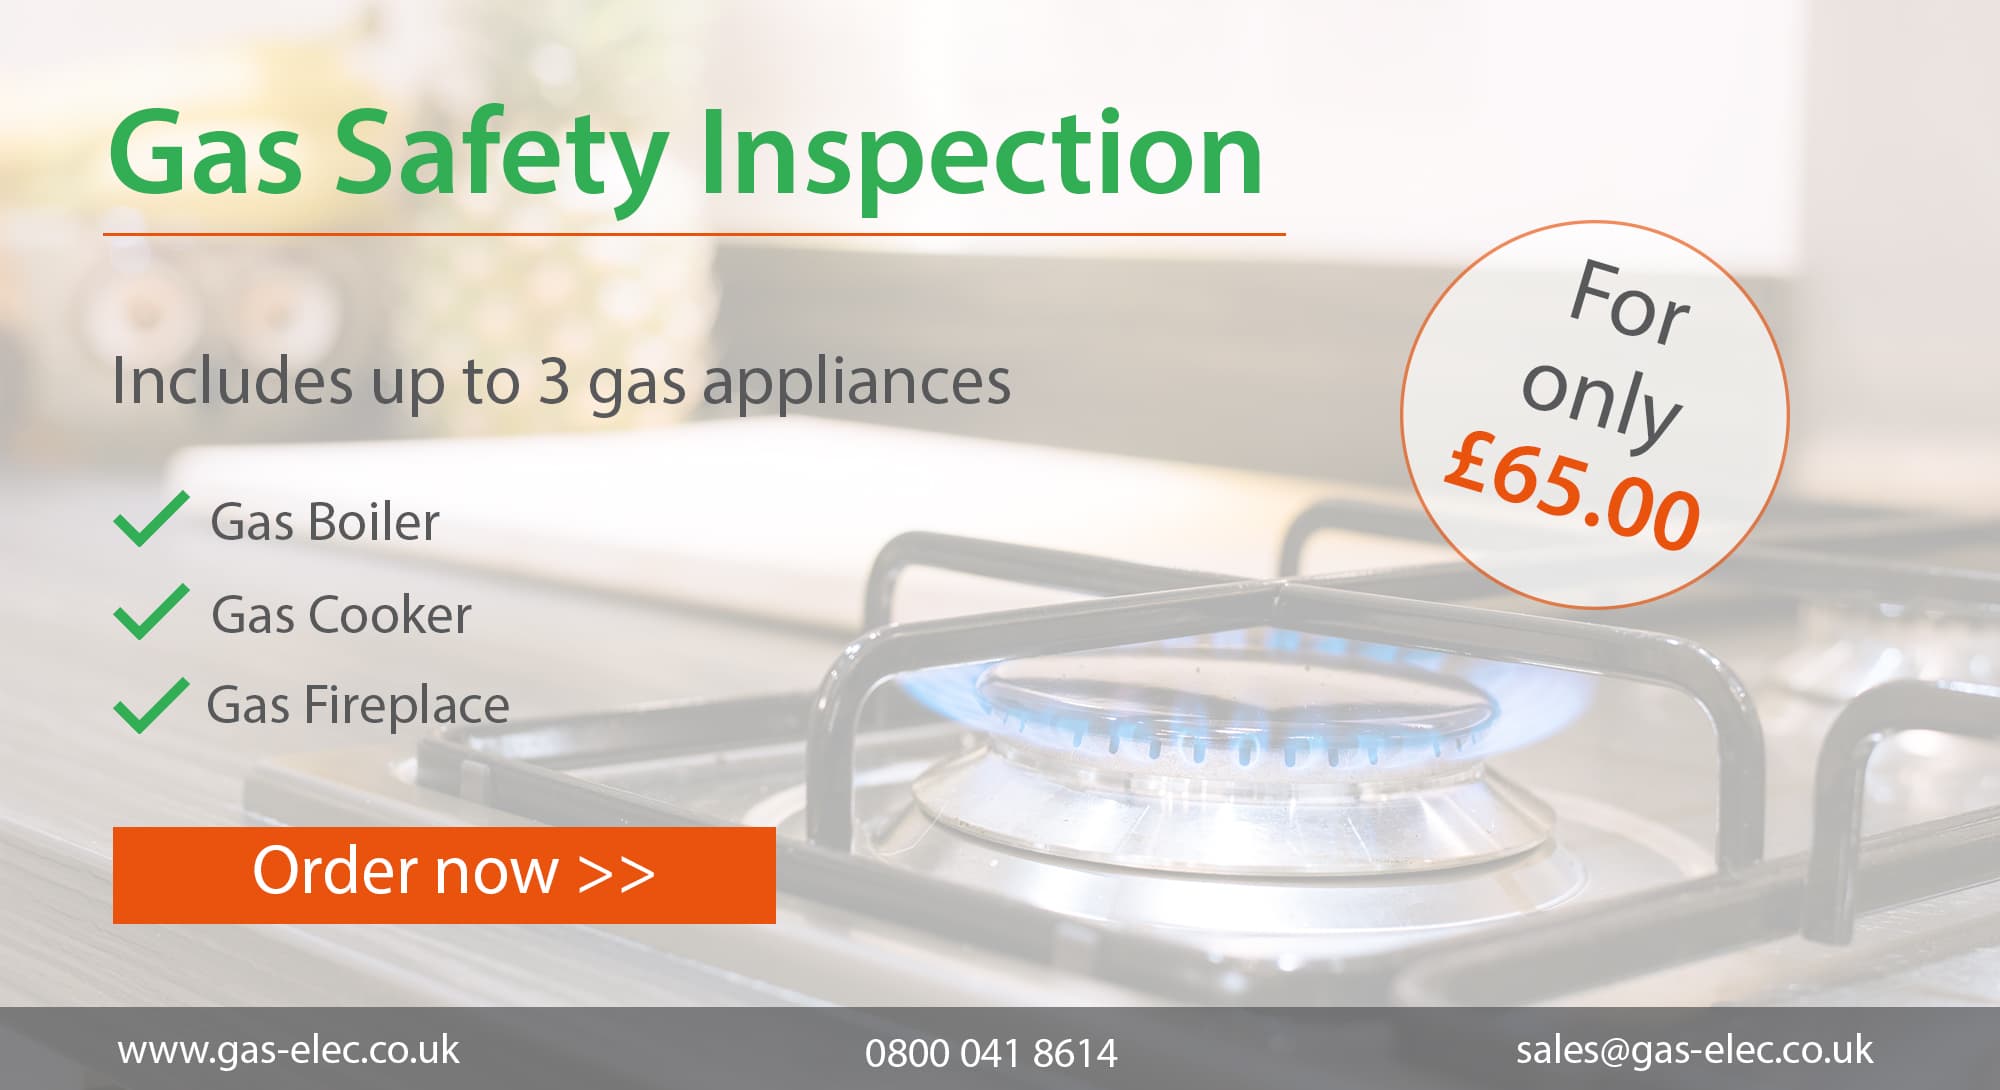 Gas safety inspection